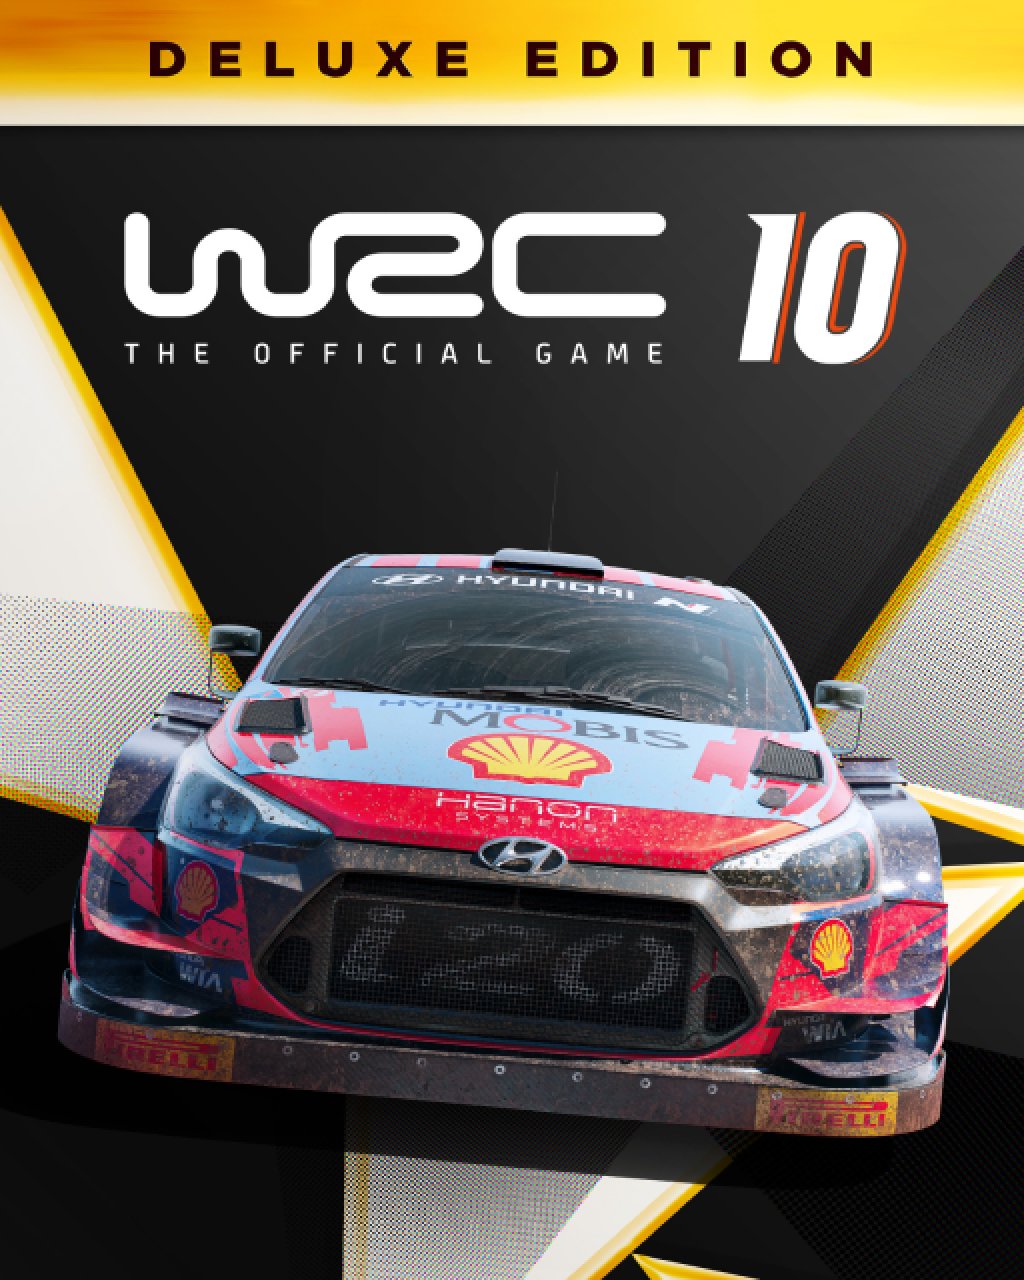 WRC 10 Deluxe Edition